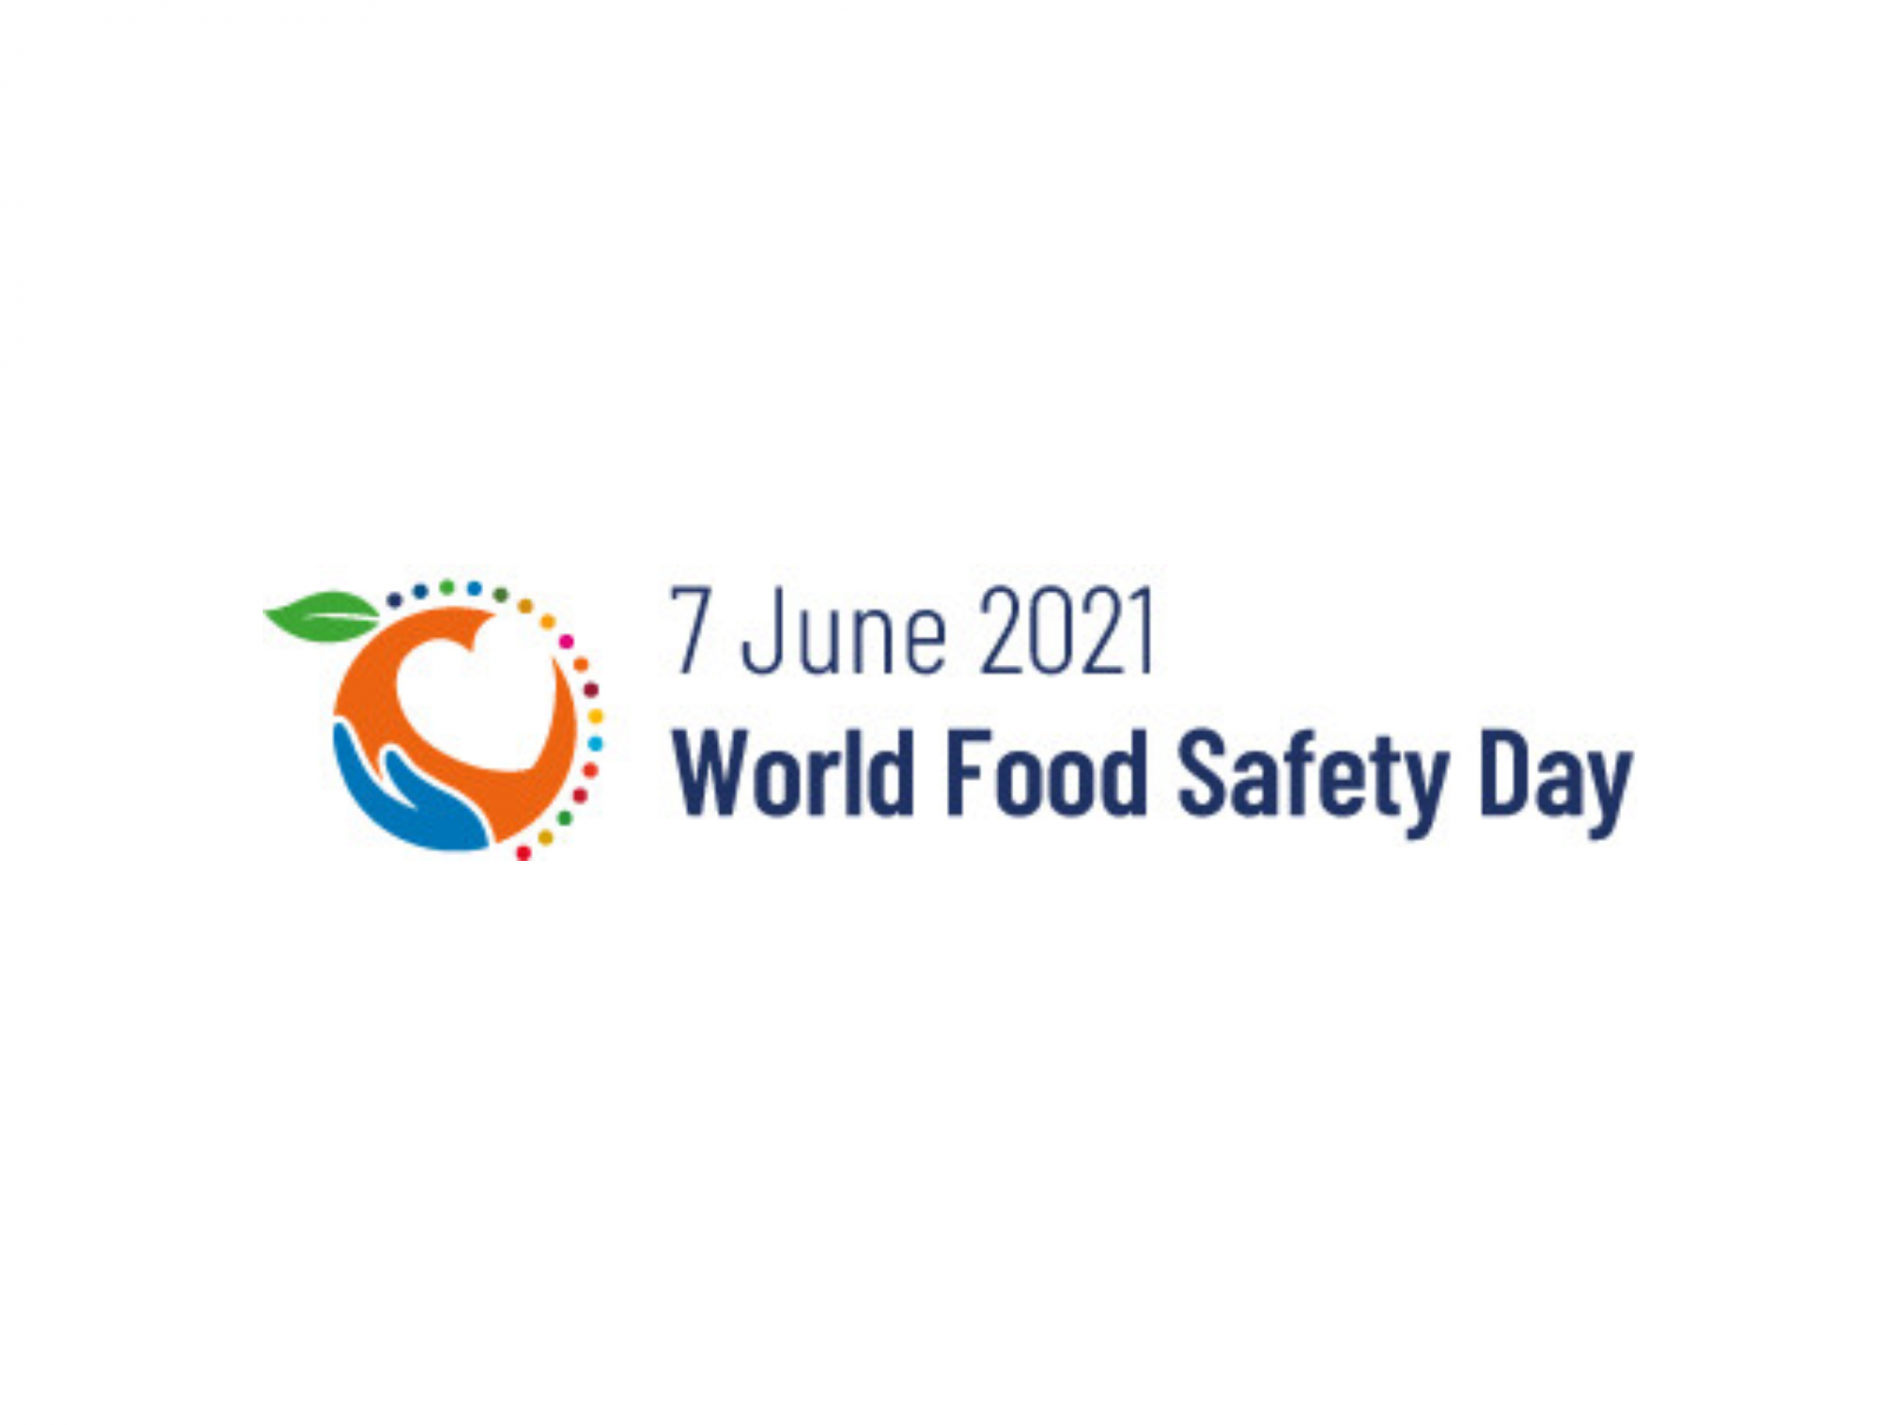 Let’s celebrate the World Food Safety Day